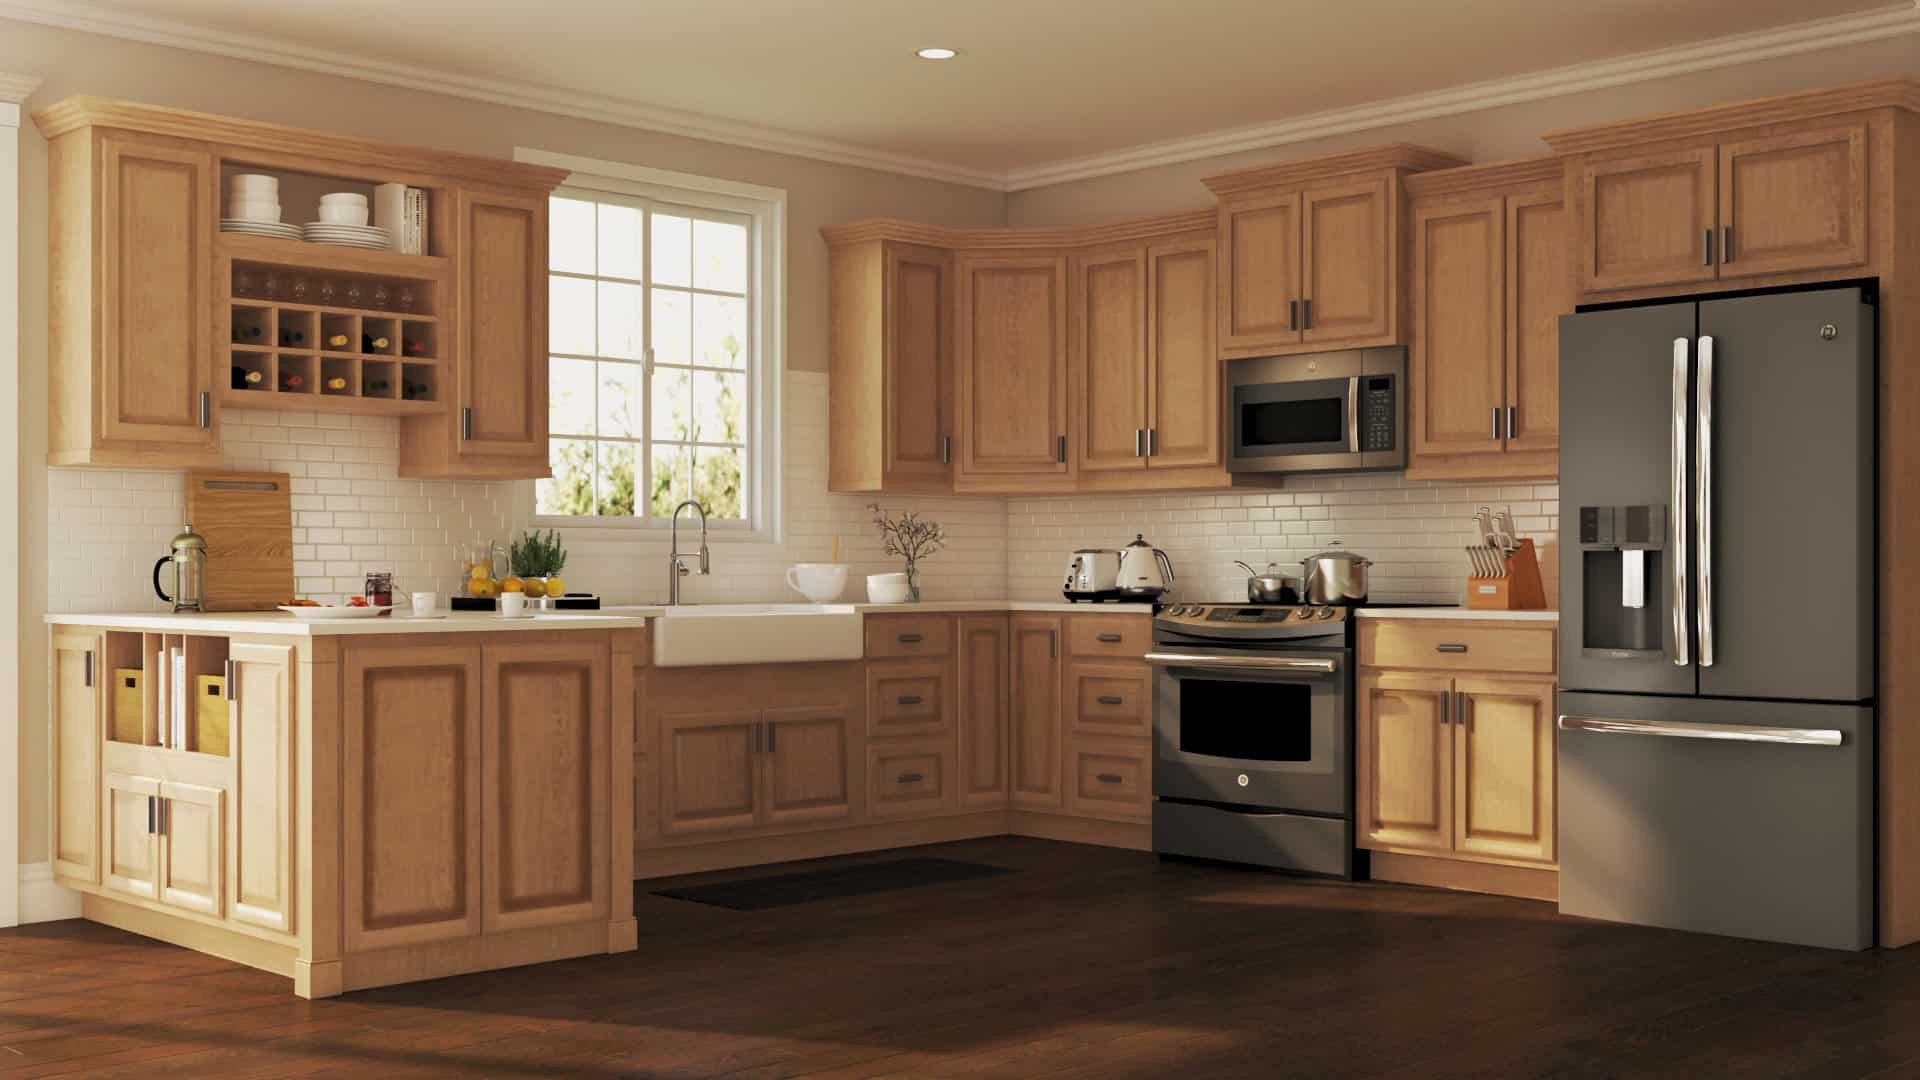 Are Oak Kitchen Cabinets Outdated
 Are Oak Kitchen Cabinets Outdated Plus Other Alternatives